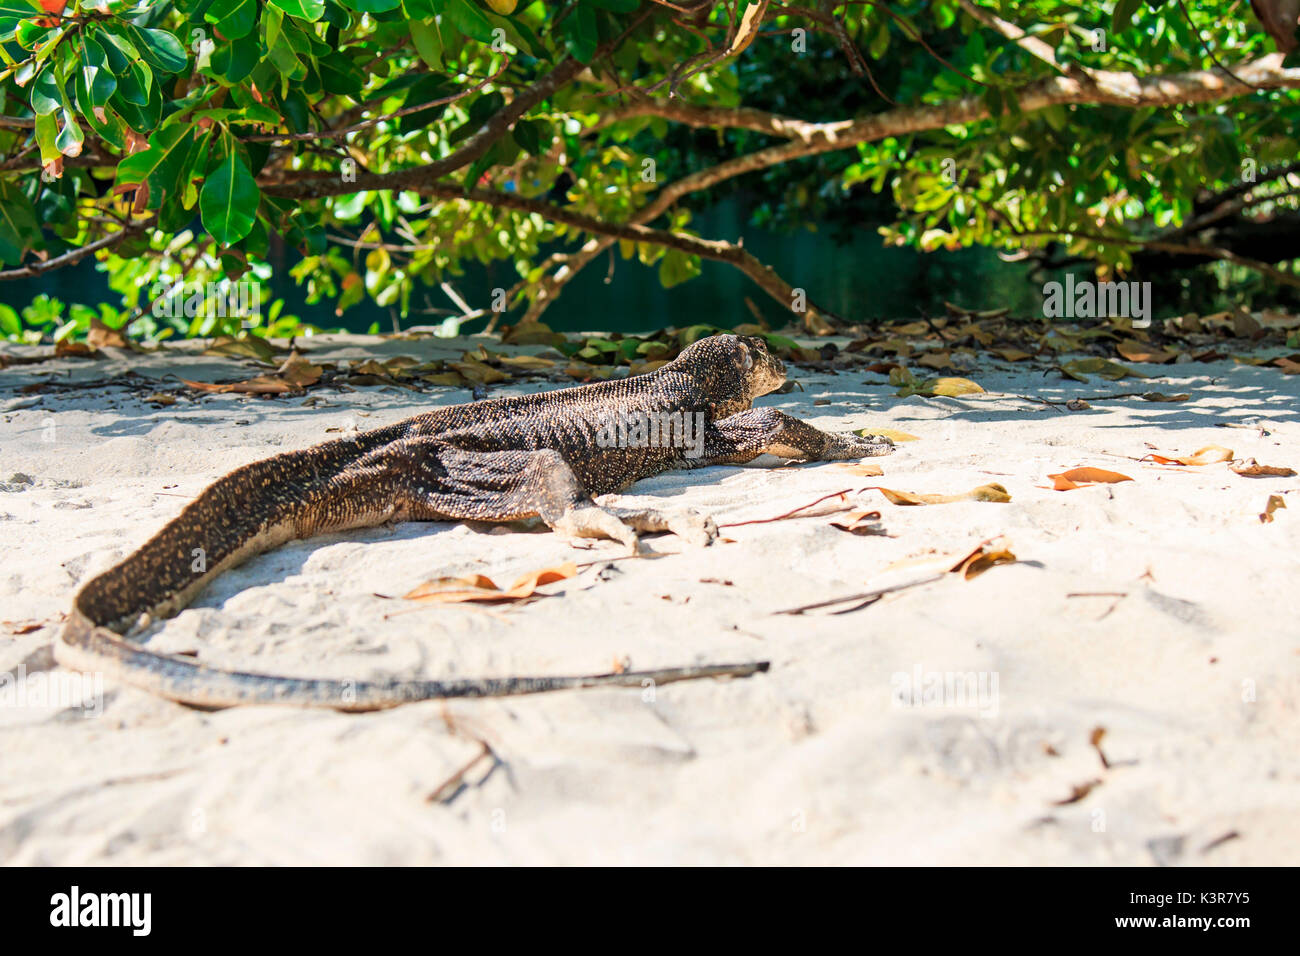 Lizard on a beach of the Philippines, Palawan water monitor Stock Photo